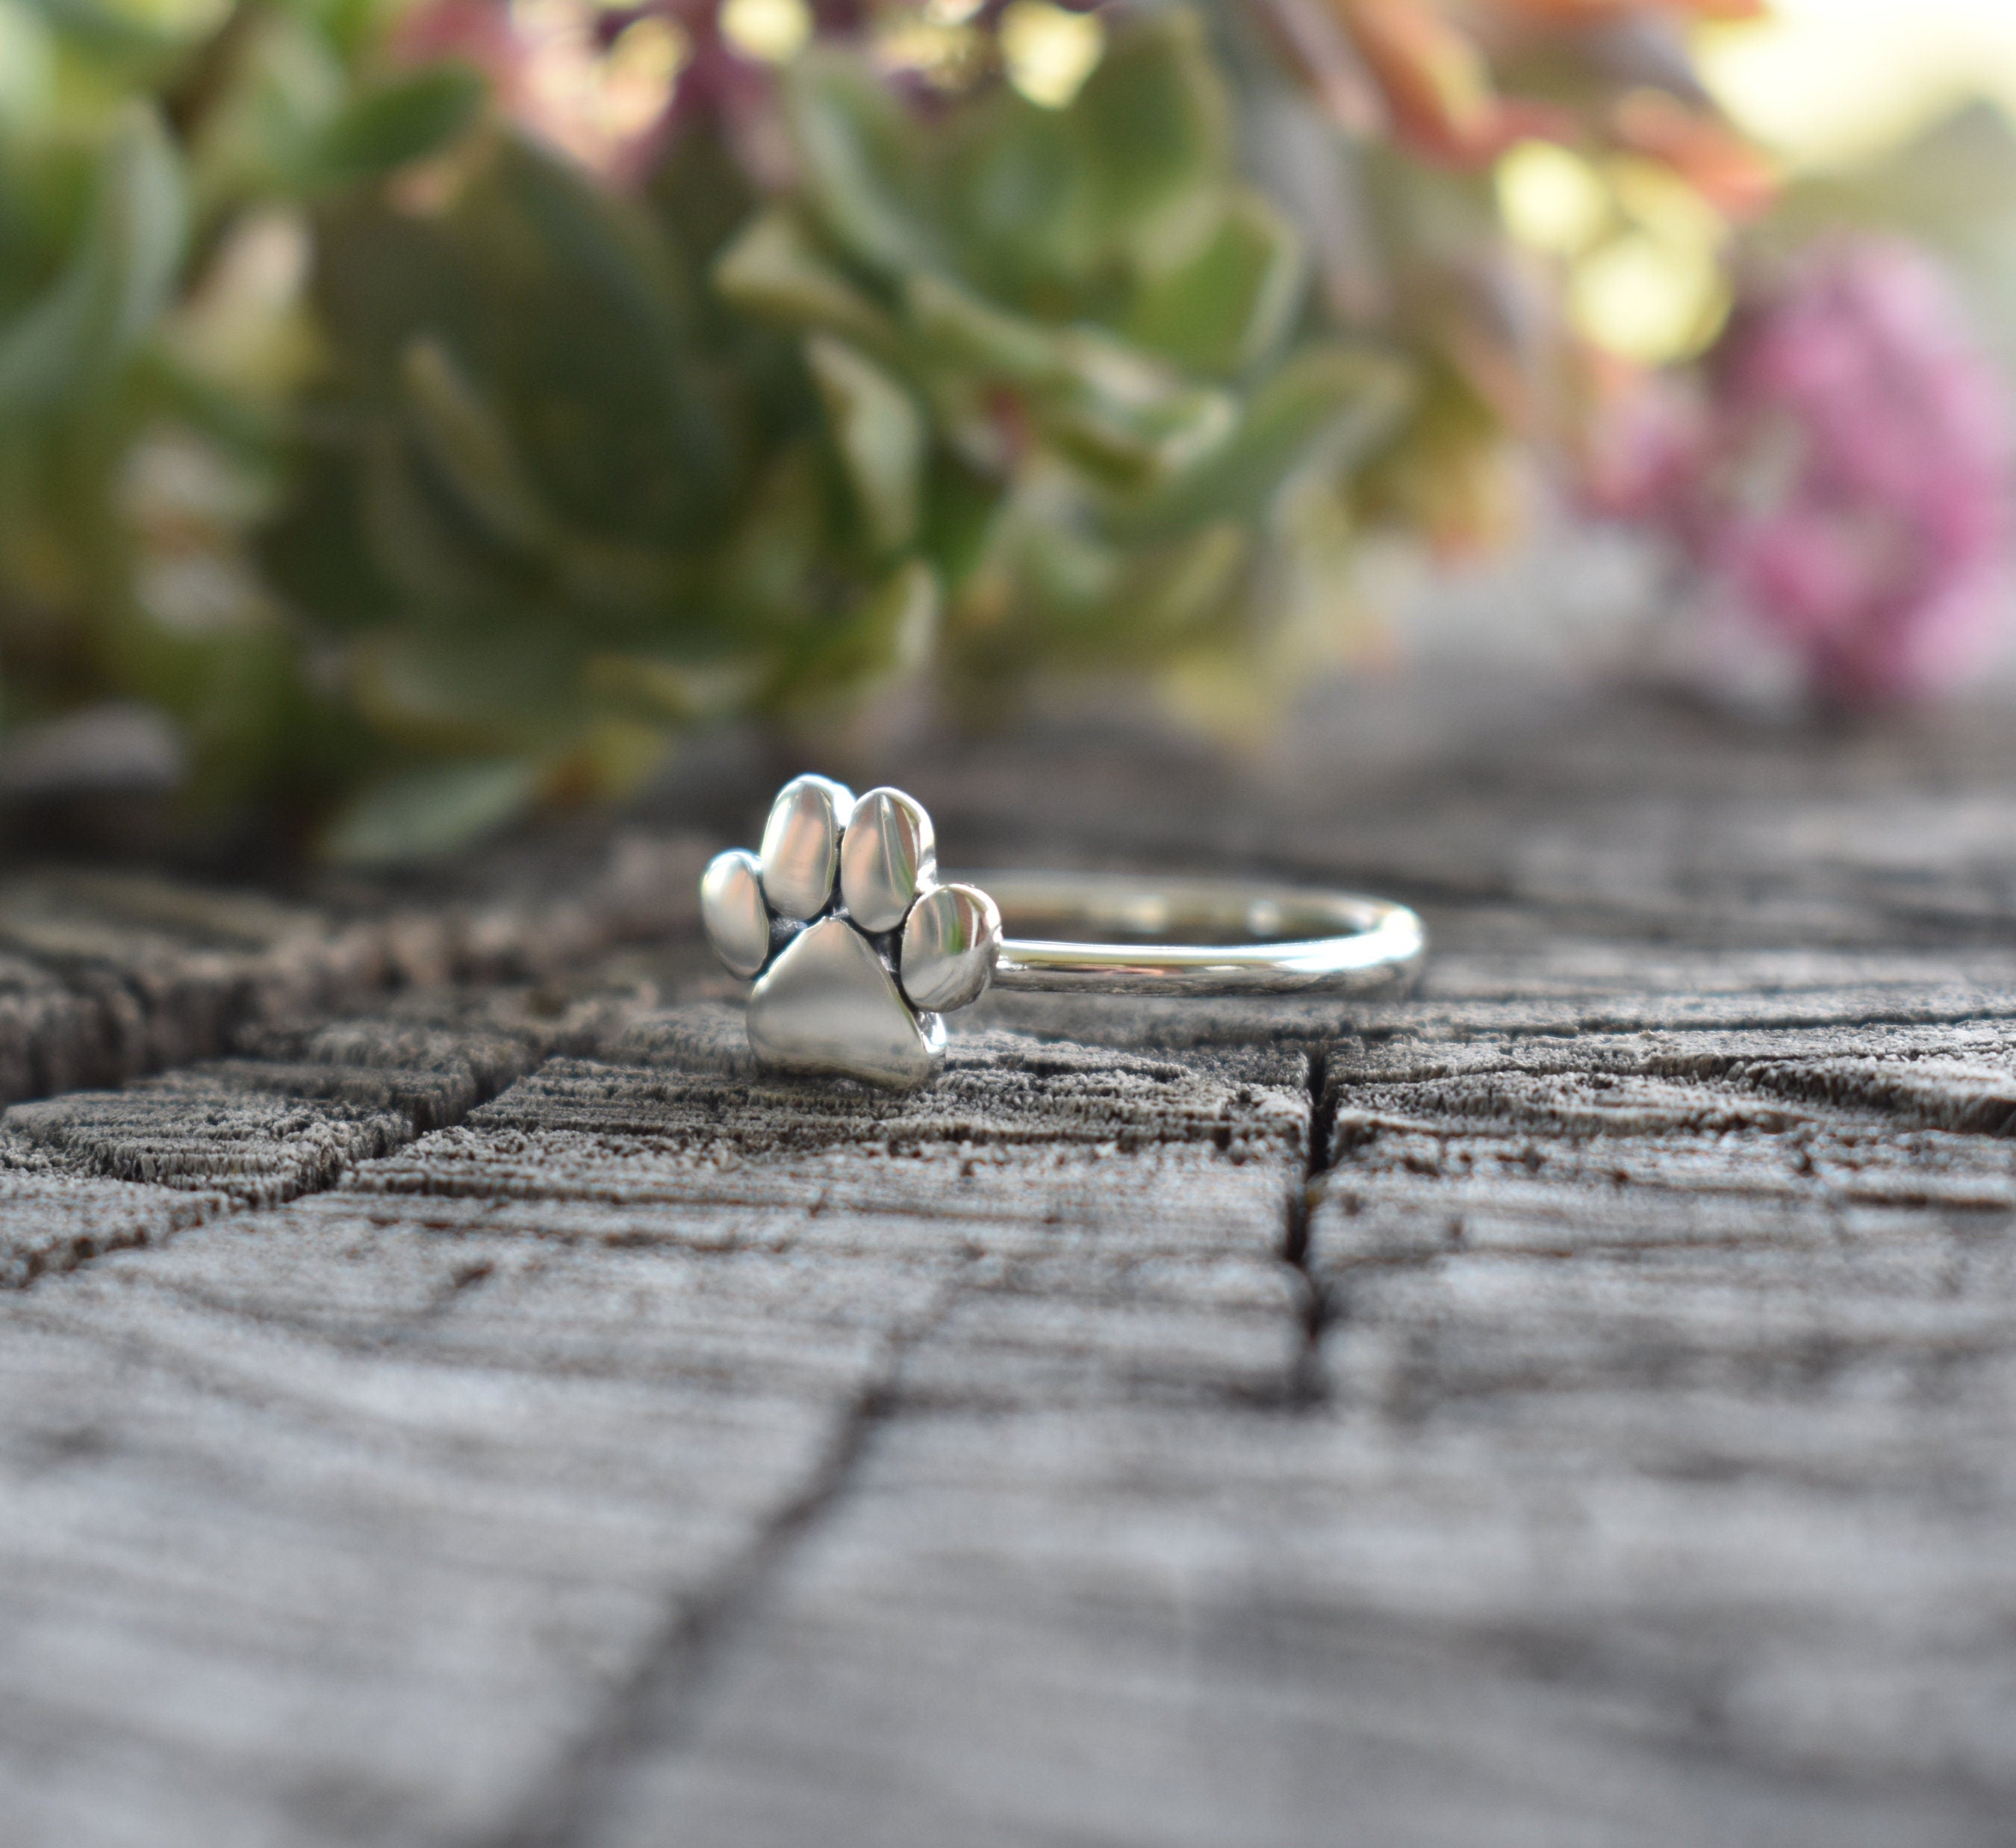 Mini Paw Print Ring With Heart in Sterling Silver, Animal Paw Print Ring  Dogs Paw Print Ring for Dog Lovers, New Puppy Memorial Gift. - Etsy